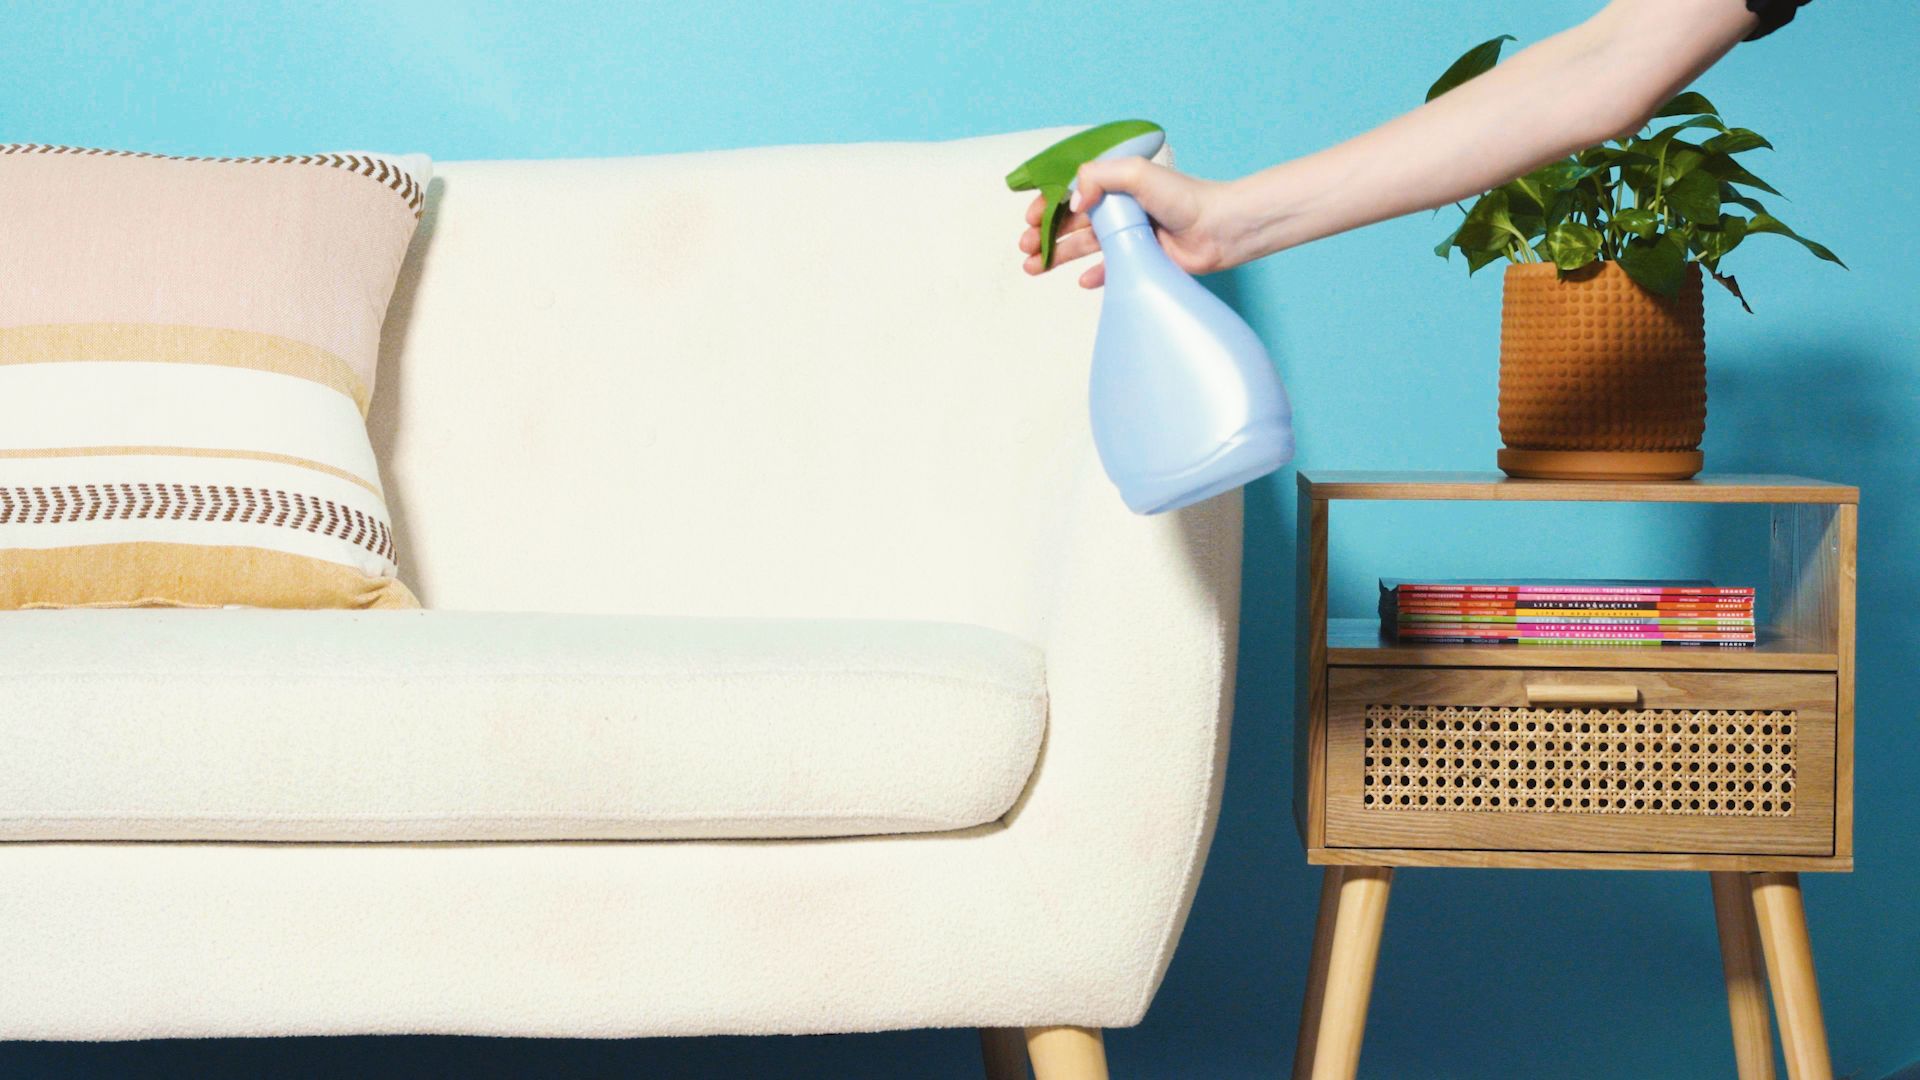 Cleaning Methods You Should Never Use On A Fabric Couch